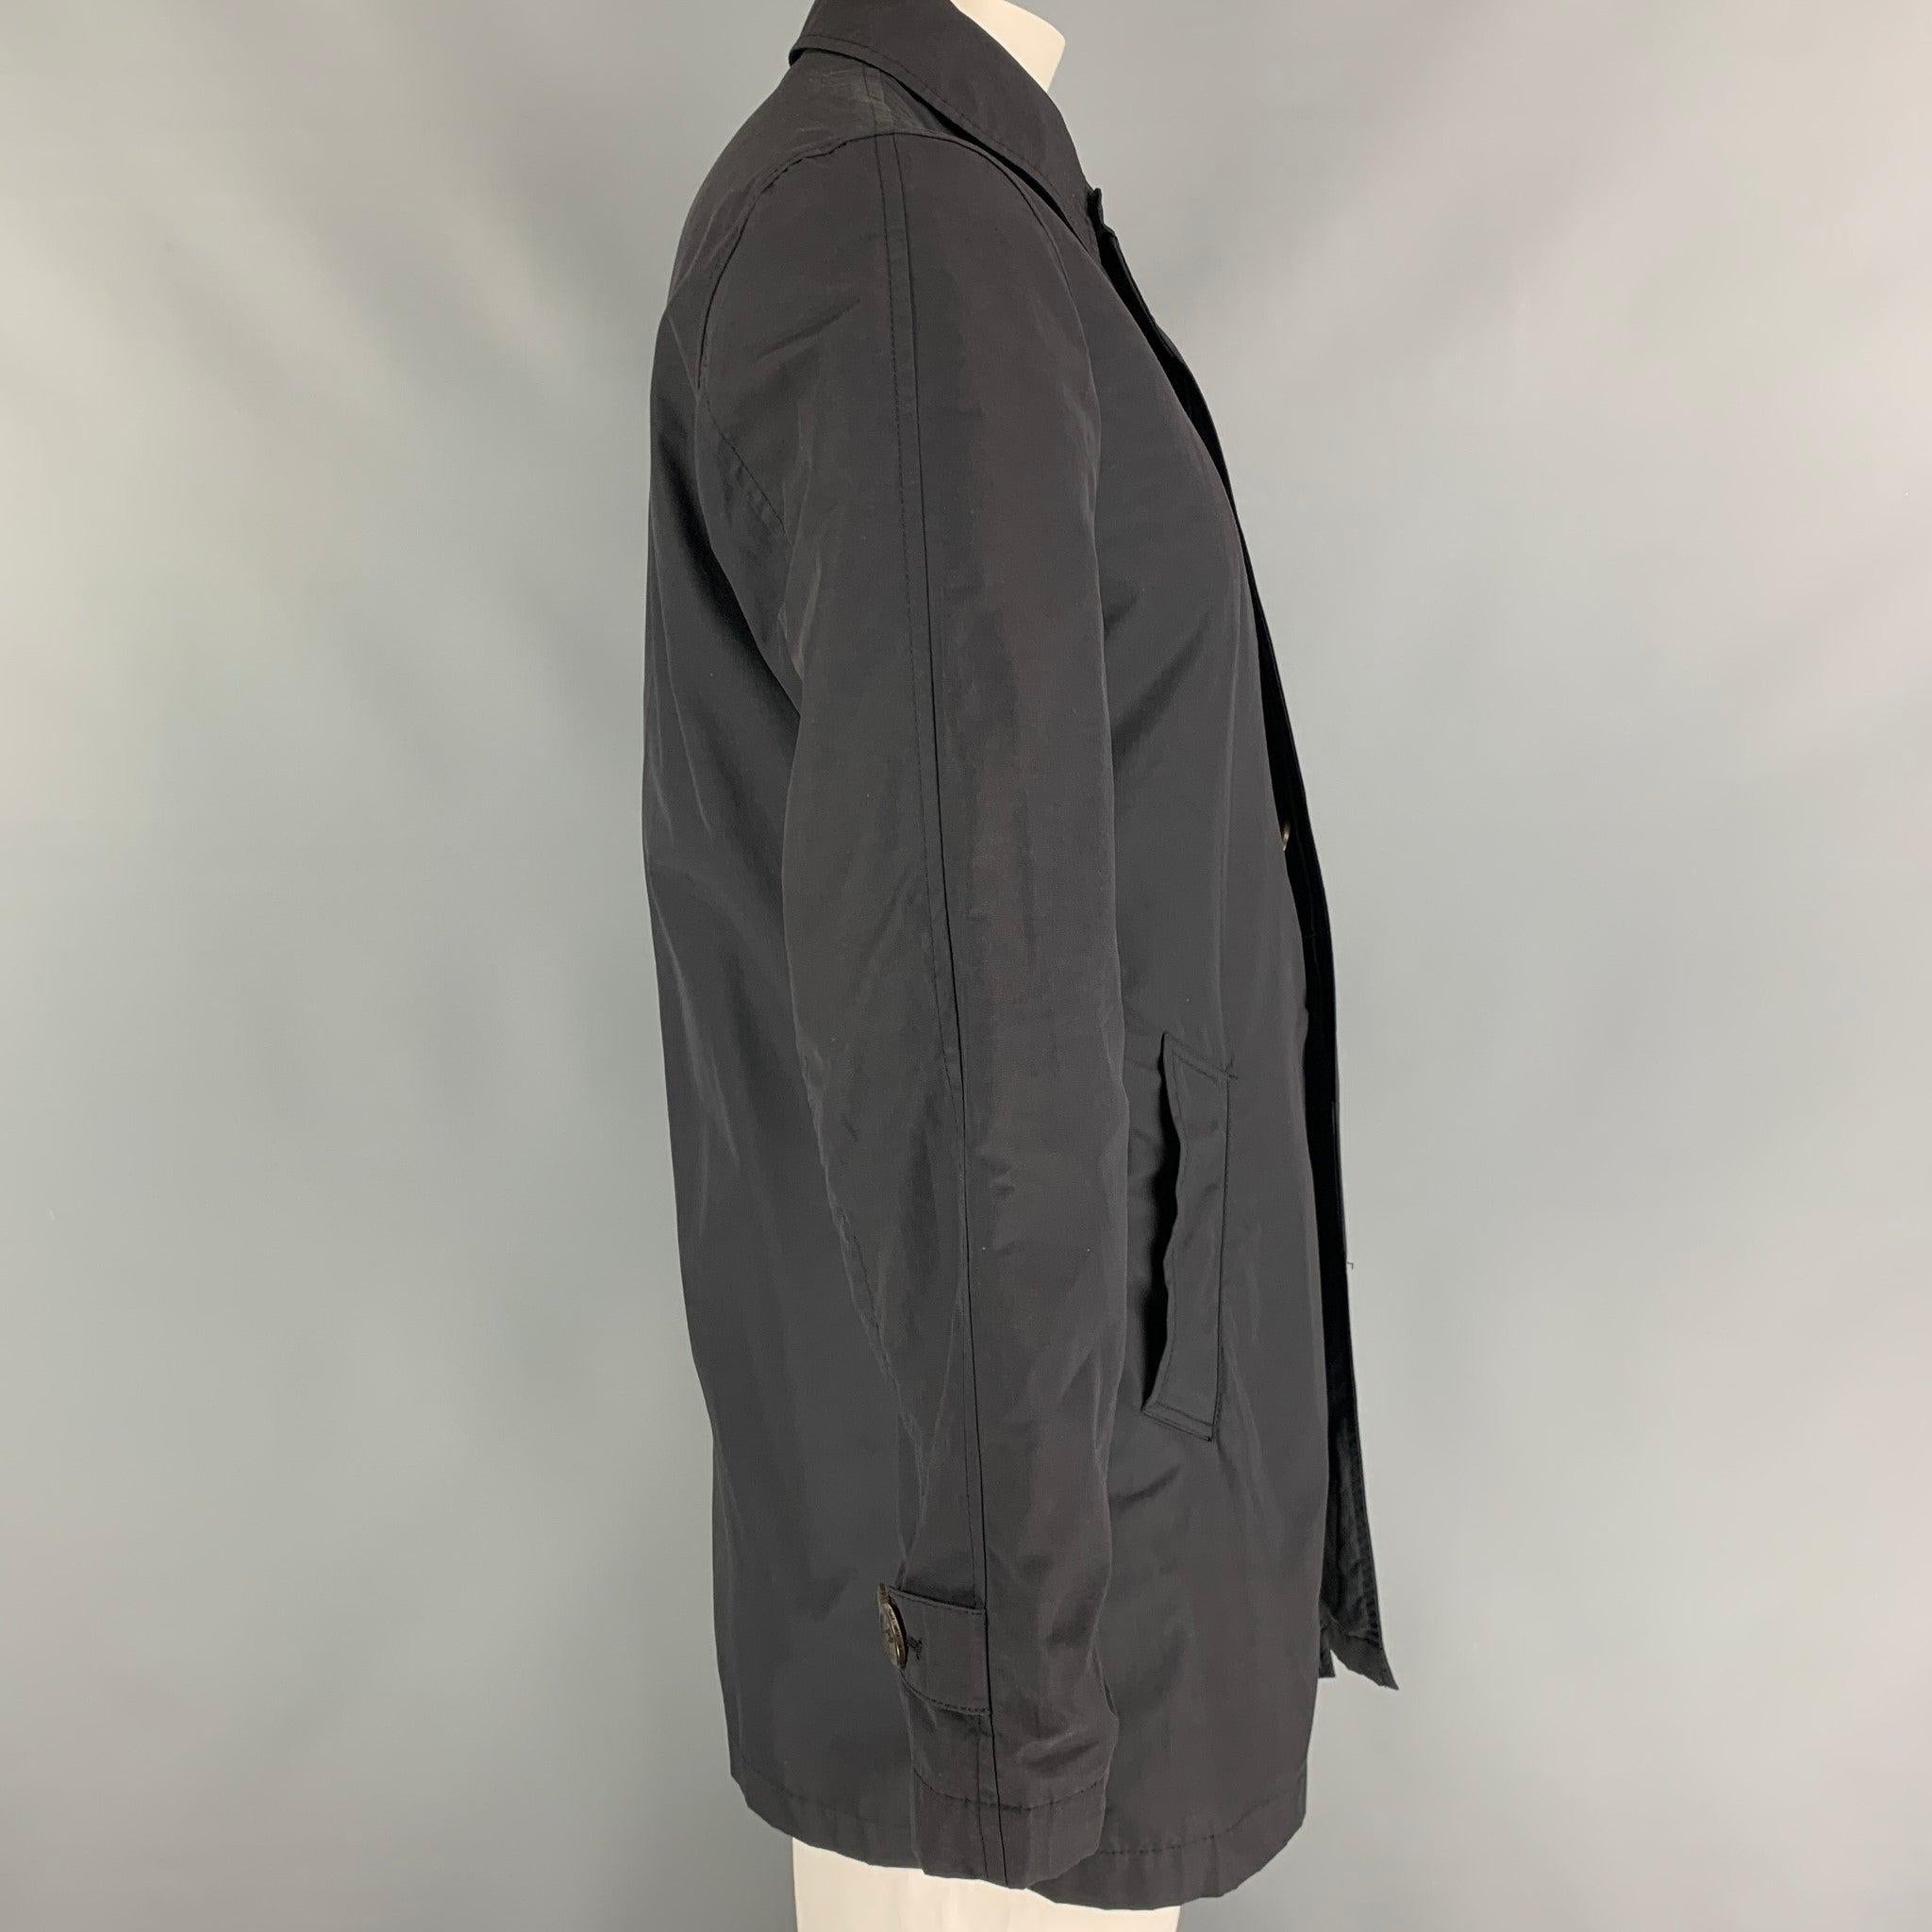 Paul Smith black trench coat style jacket comes in a nylon fabrication with blue cotton interfacing.Features include welt pockets,tone on tone buttons,and shirt collar.Made in Lithuania.Excellent Pre-Owned Condition.  

Marked:   Size Medium